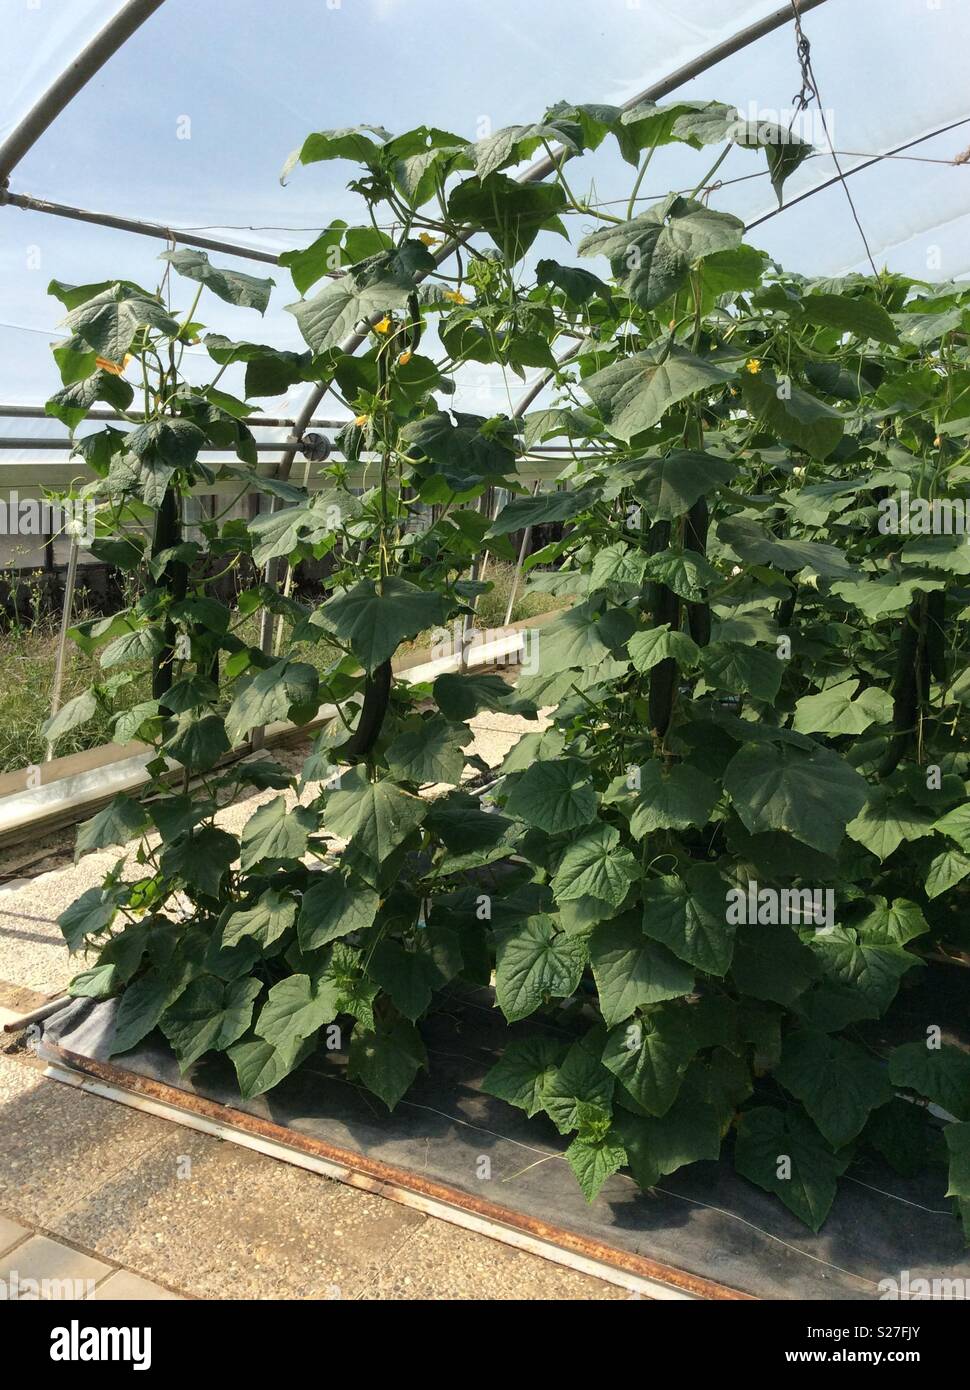 Growling cucumber in greenhouse Stock Photo